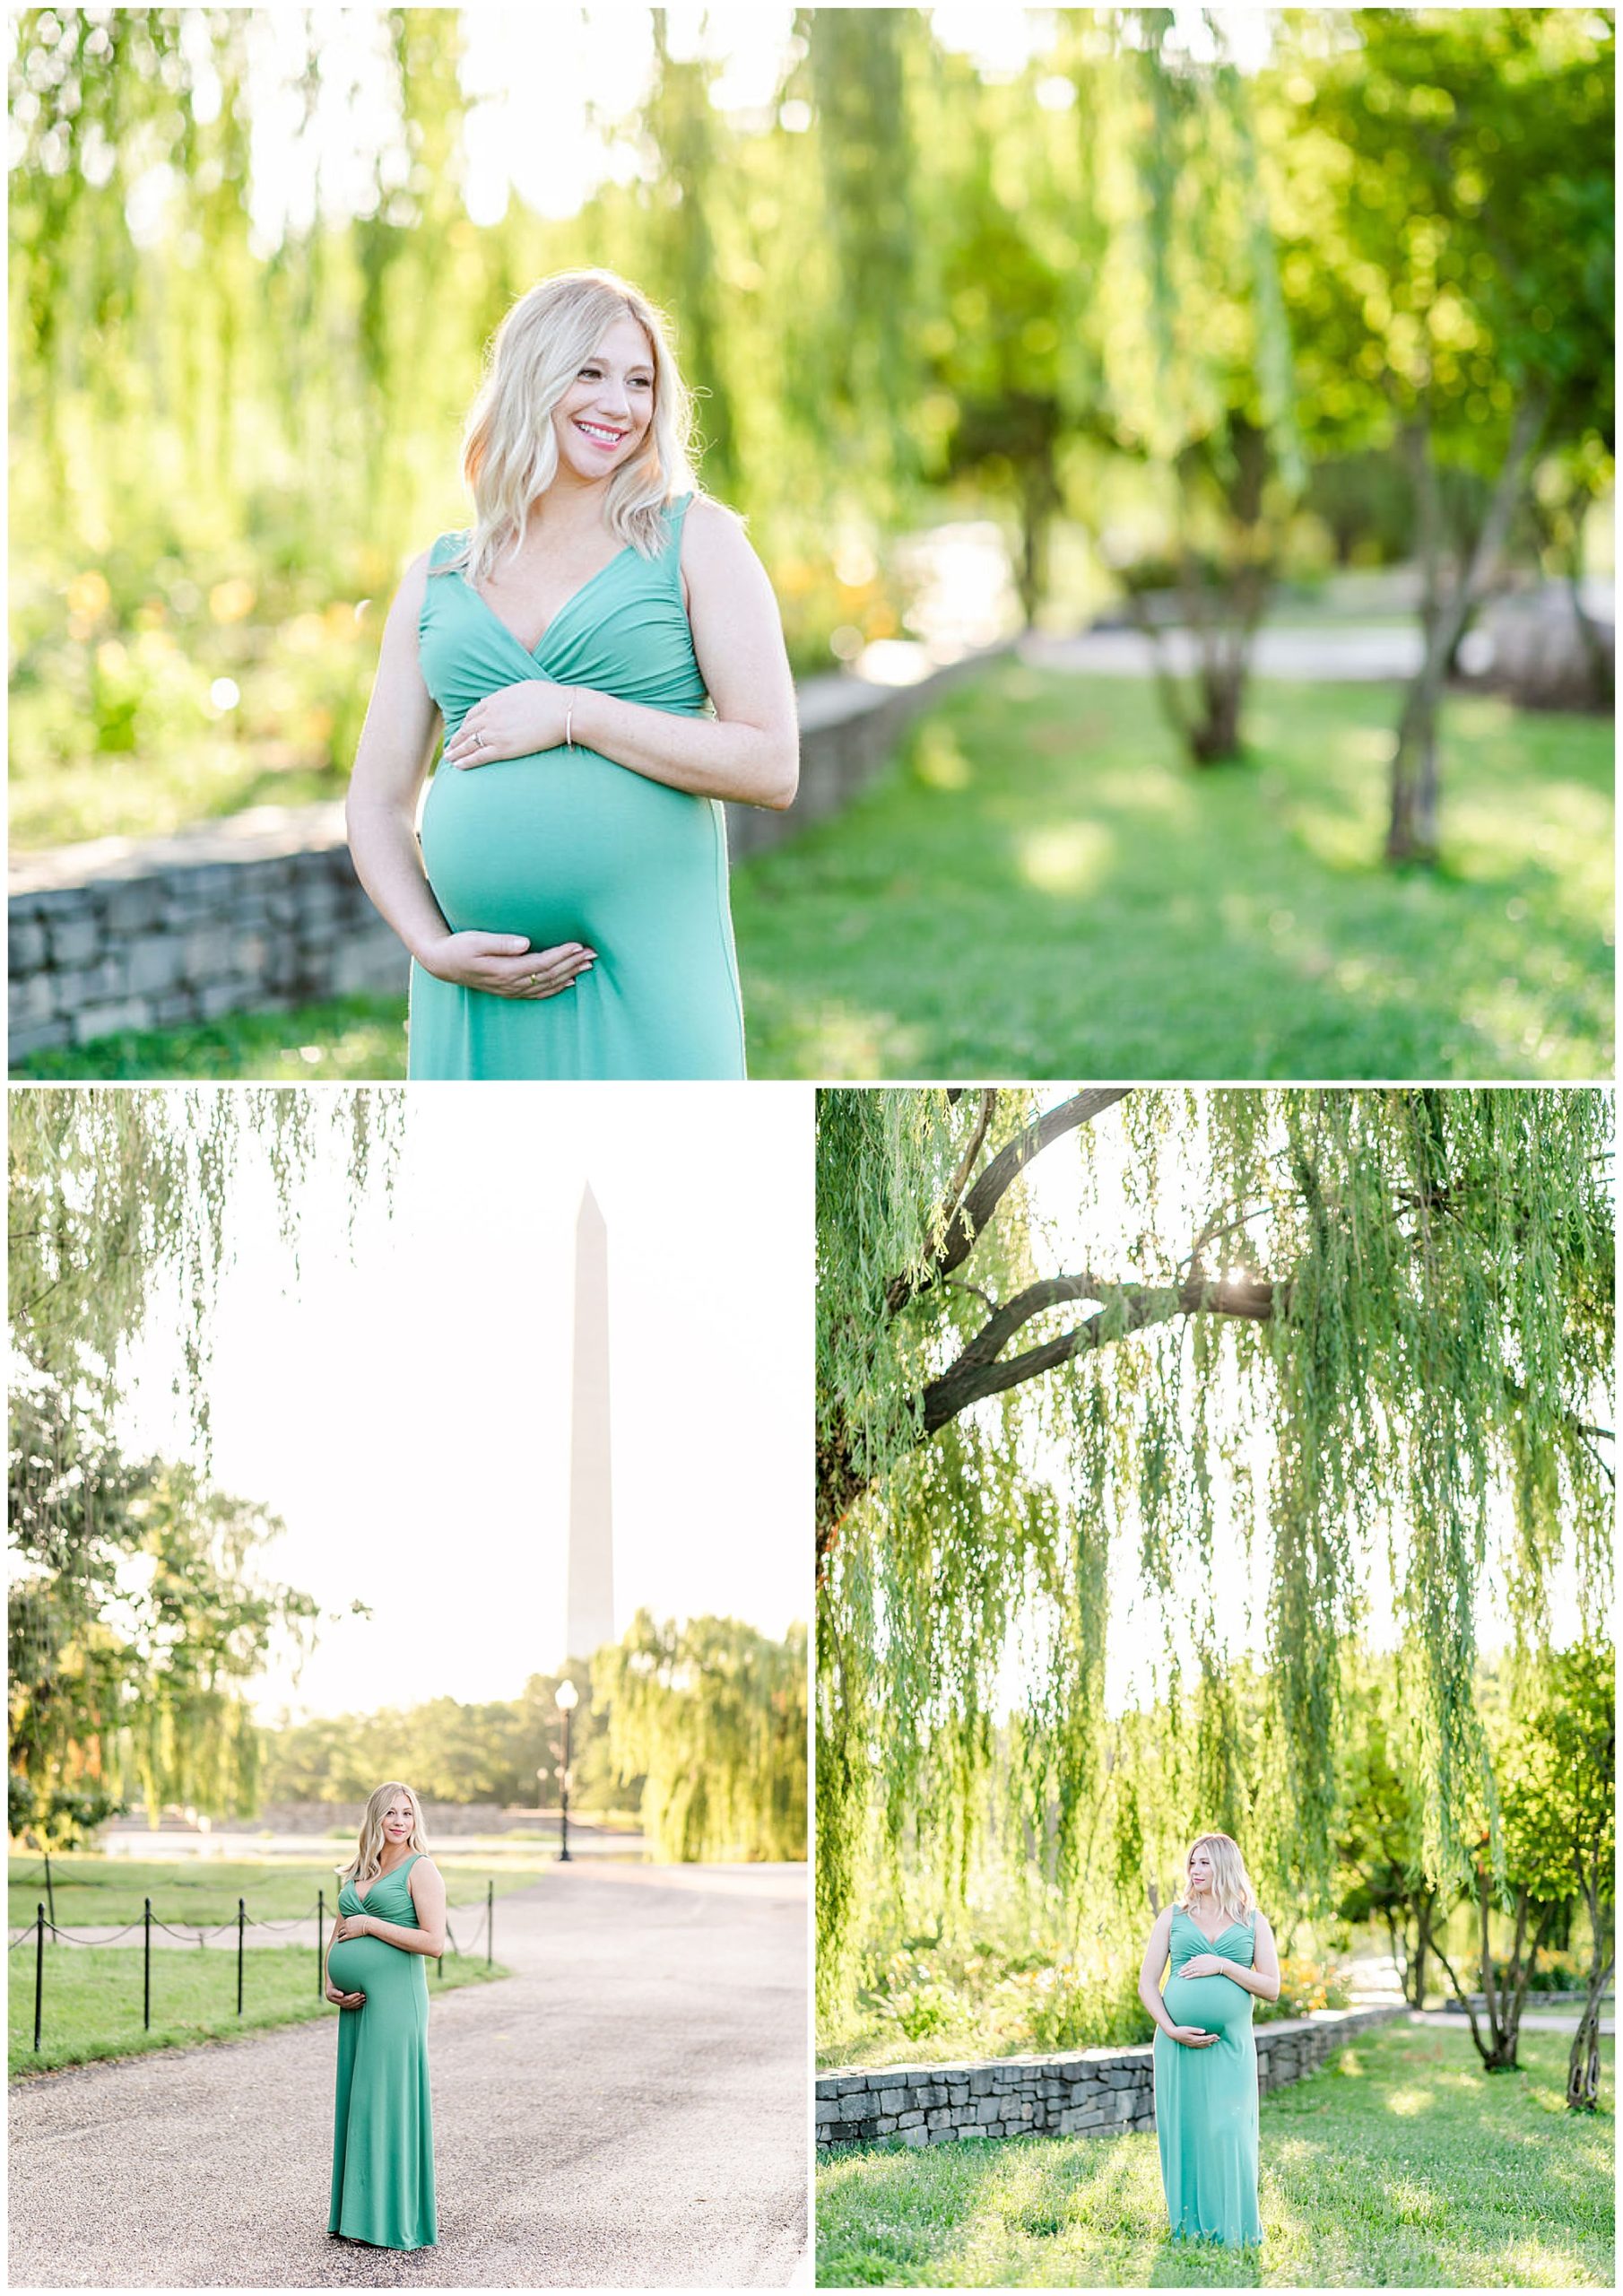 National Mall maternity photos, Lincoln Memorial maternity photos, Constitution Gardens maternity photos, DC maternity photos, DC maternity photographer, classic DC portraits, pregnant couple, natural light maternity photos, Rachel E.H. Photography, pregnant woman smiling, woman under willow tree, woman holding pregnant belly